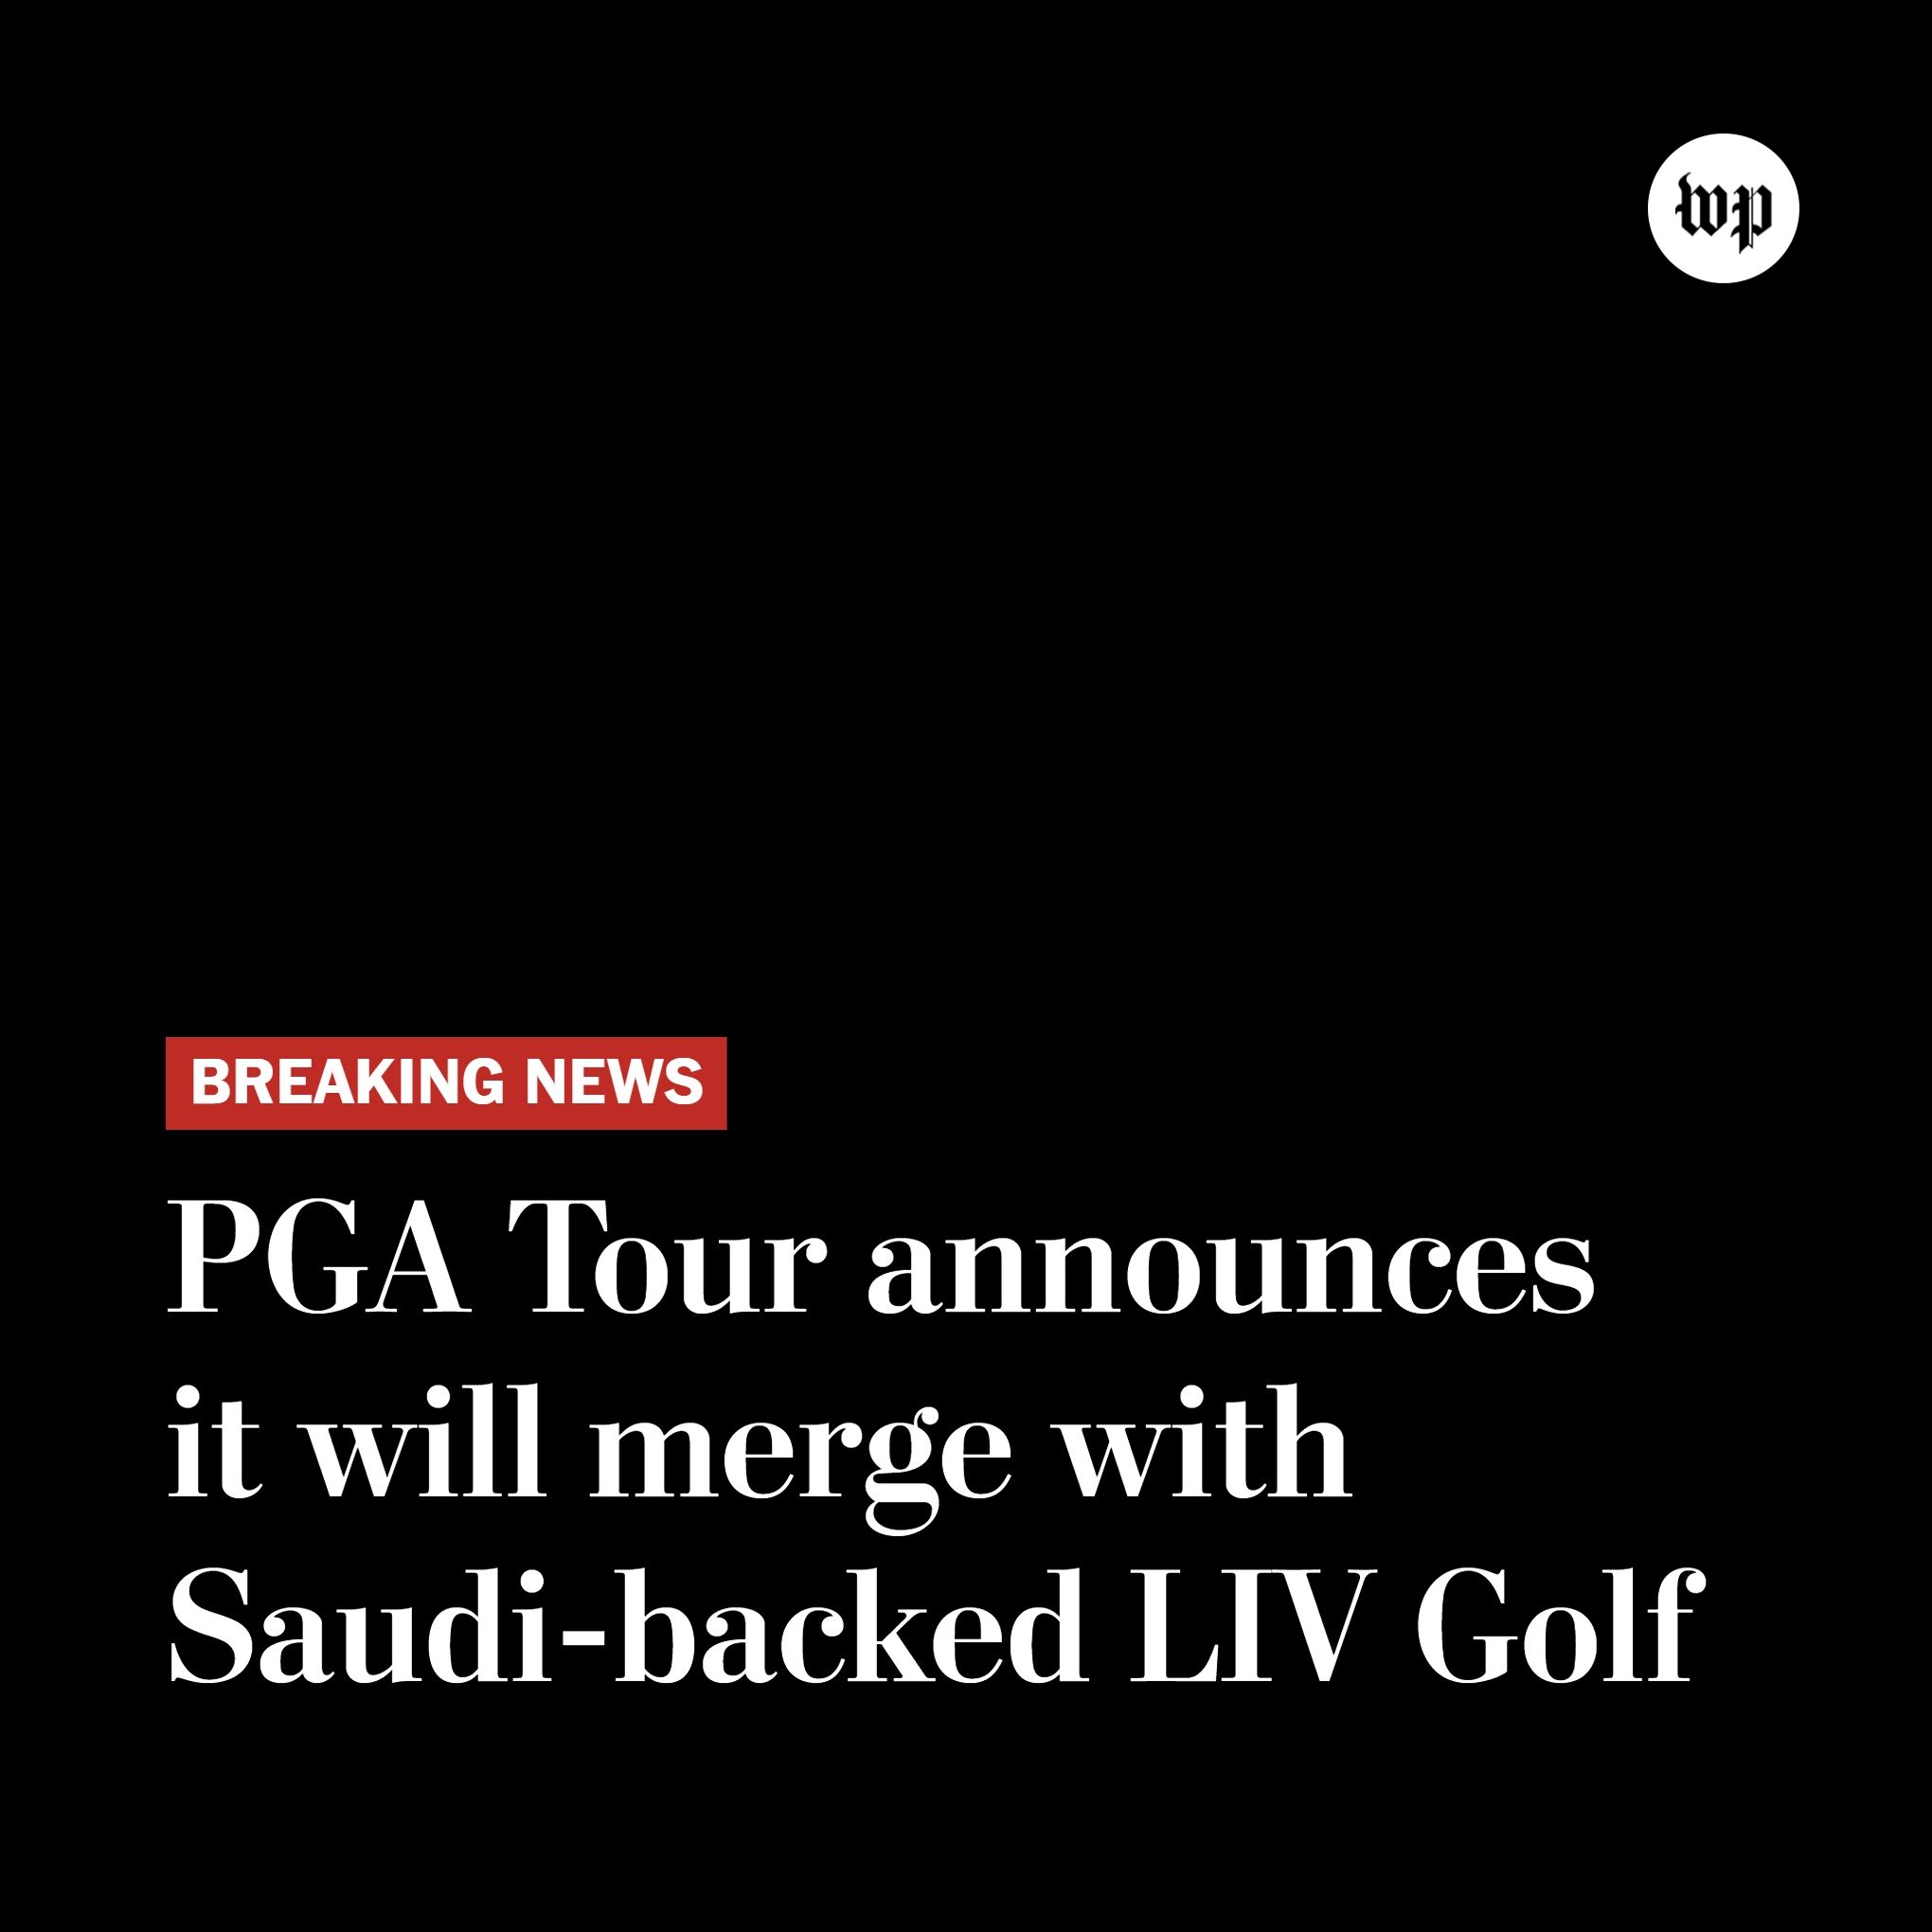 A headline reads "Breaking news: PGA Tour annouces it will merge with Saudi-backed LIV Golf"